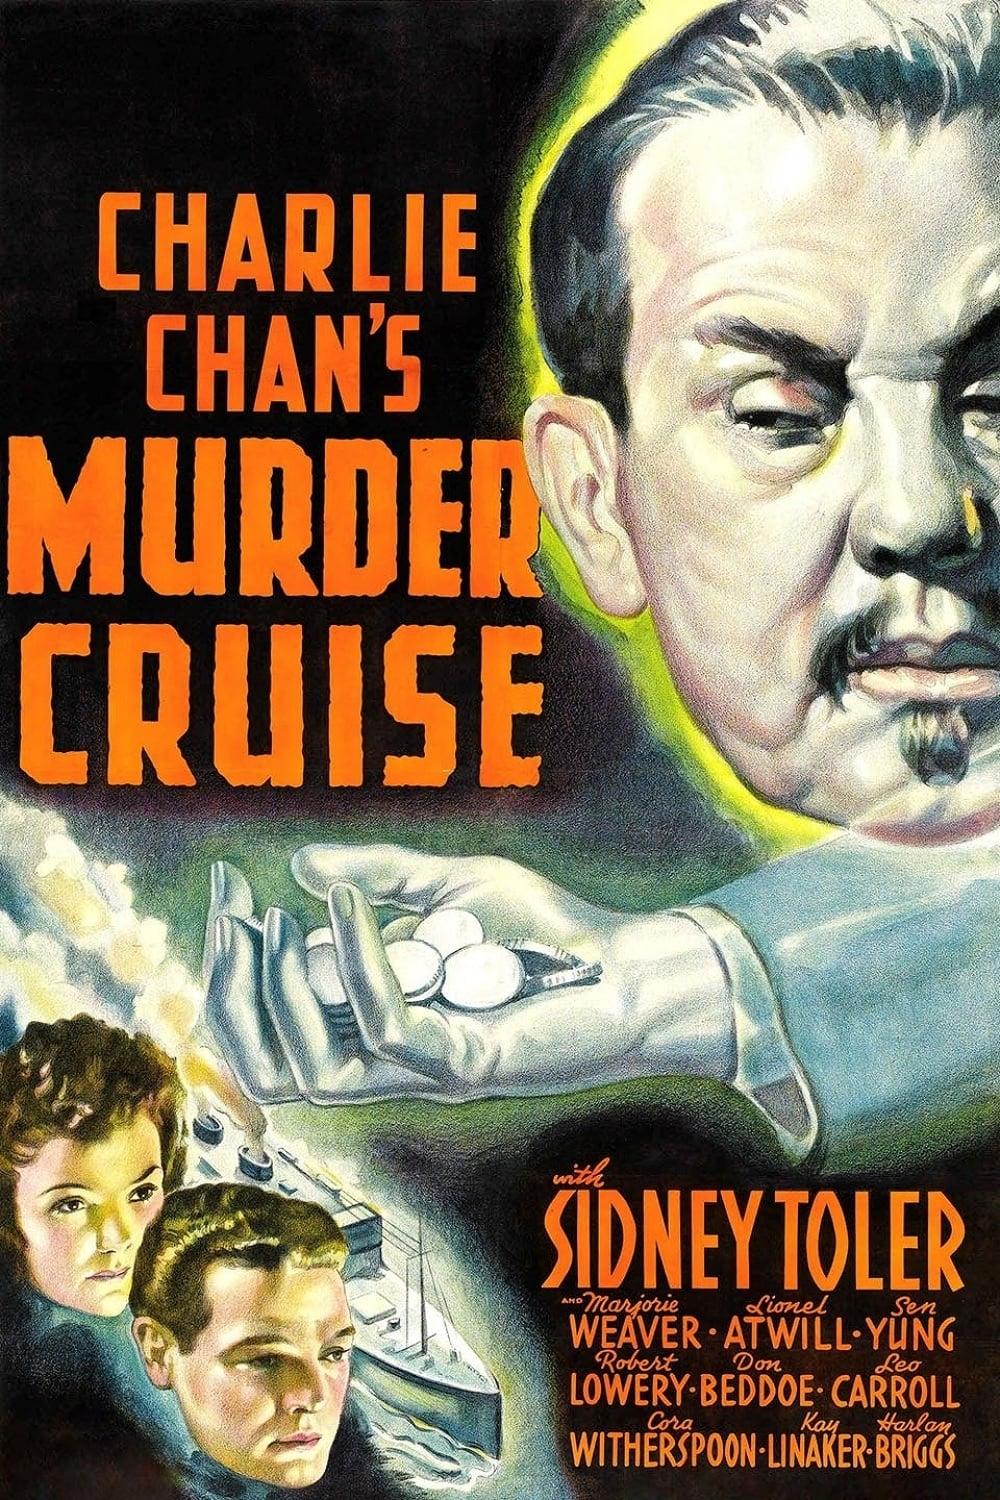 Charlie Chan's Murder Cruise poster